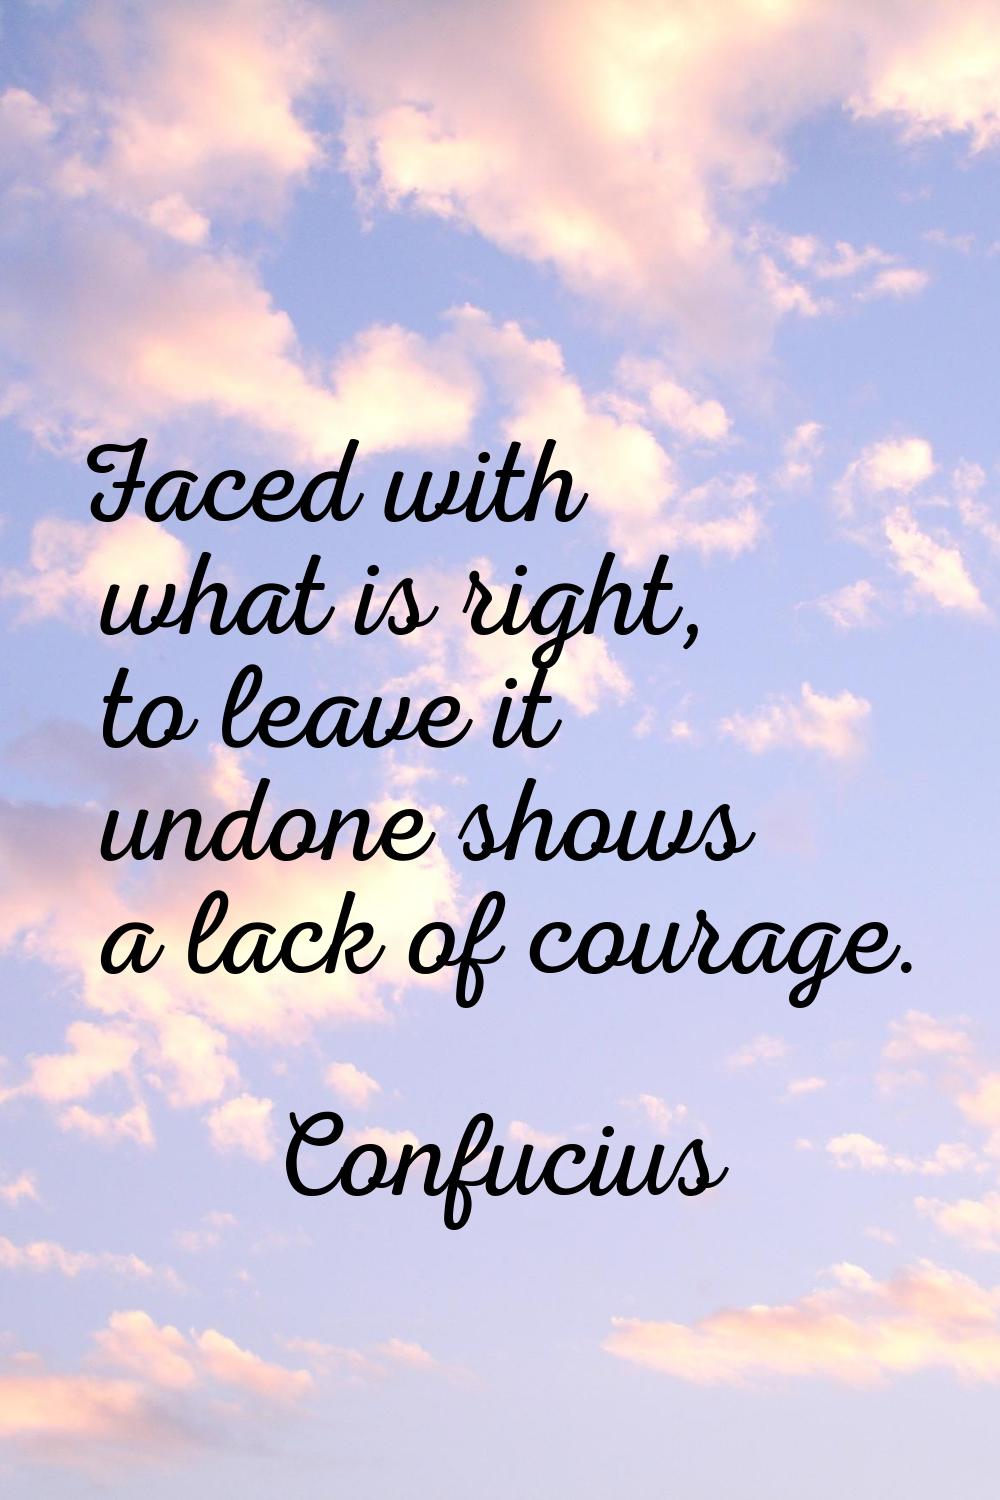 Faced with what is right, to leave it undone shows a lack of courage.